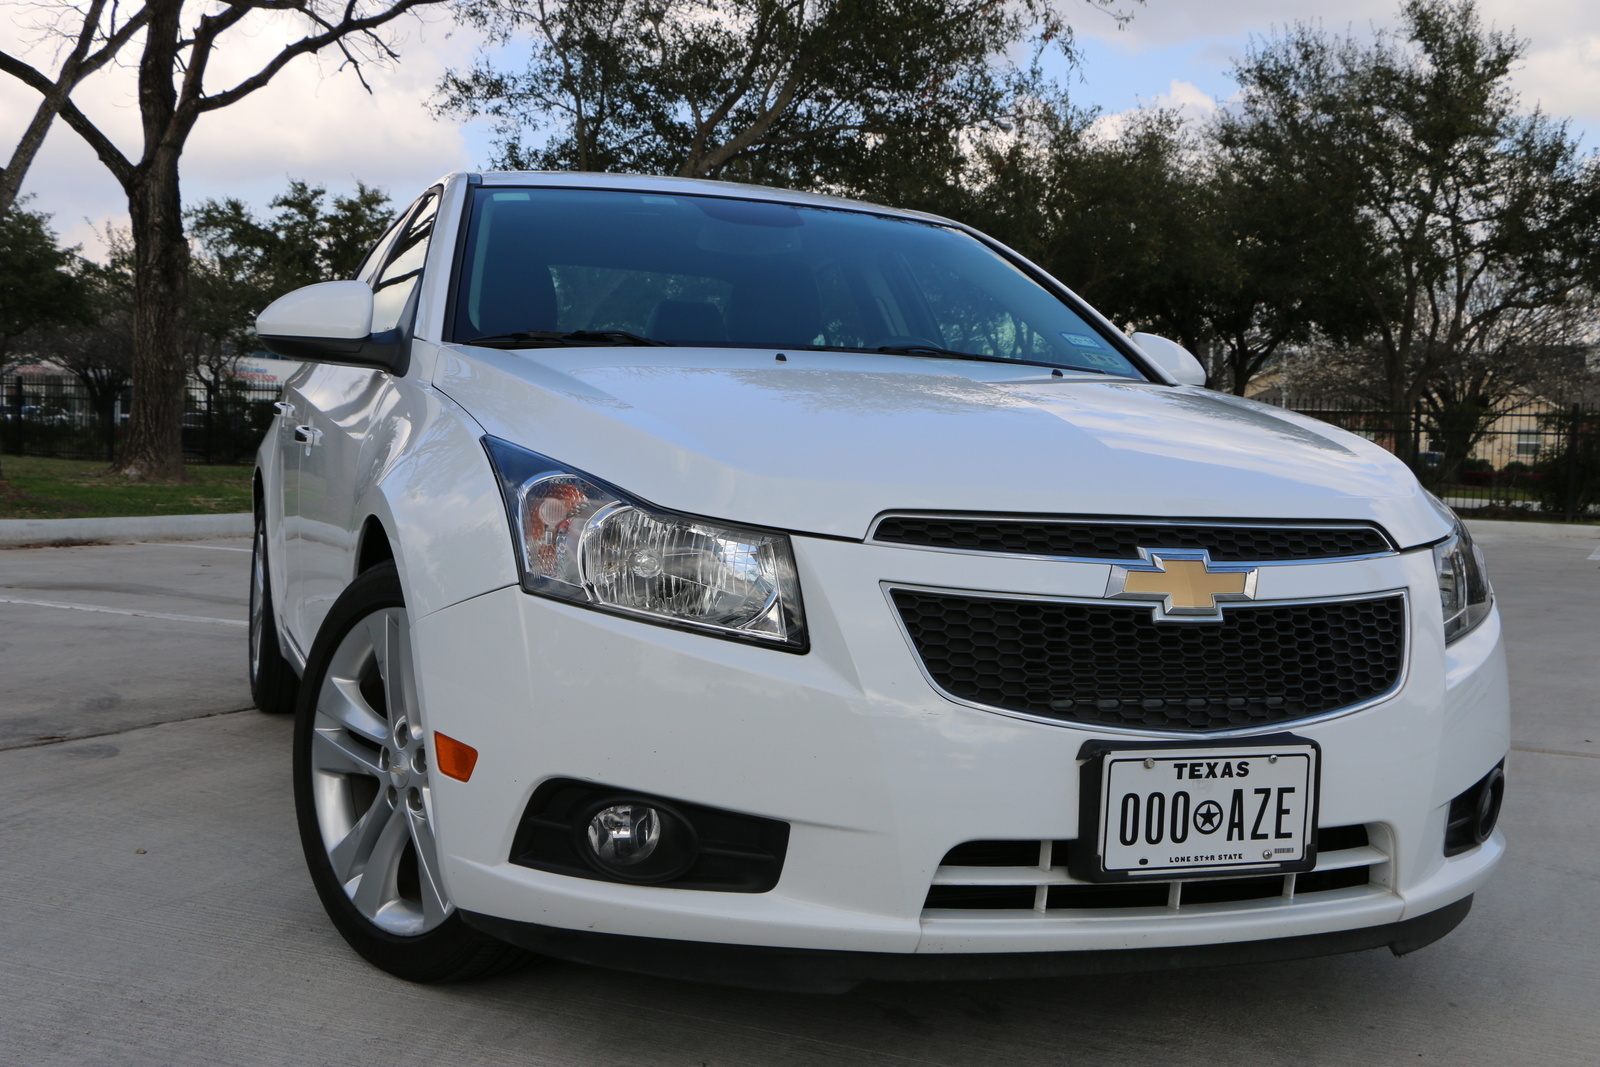 2013 Chevrolet Cruze Research, Photos, Specs and Expertise